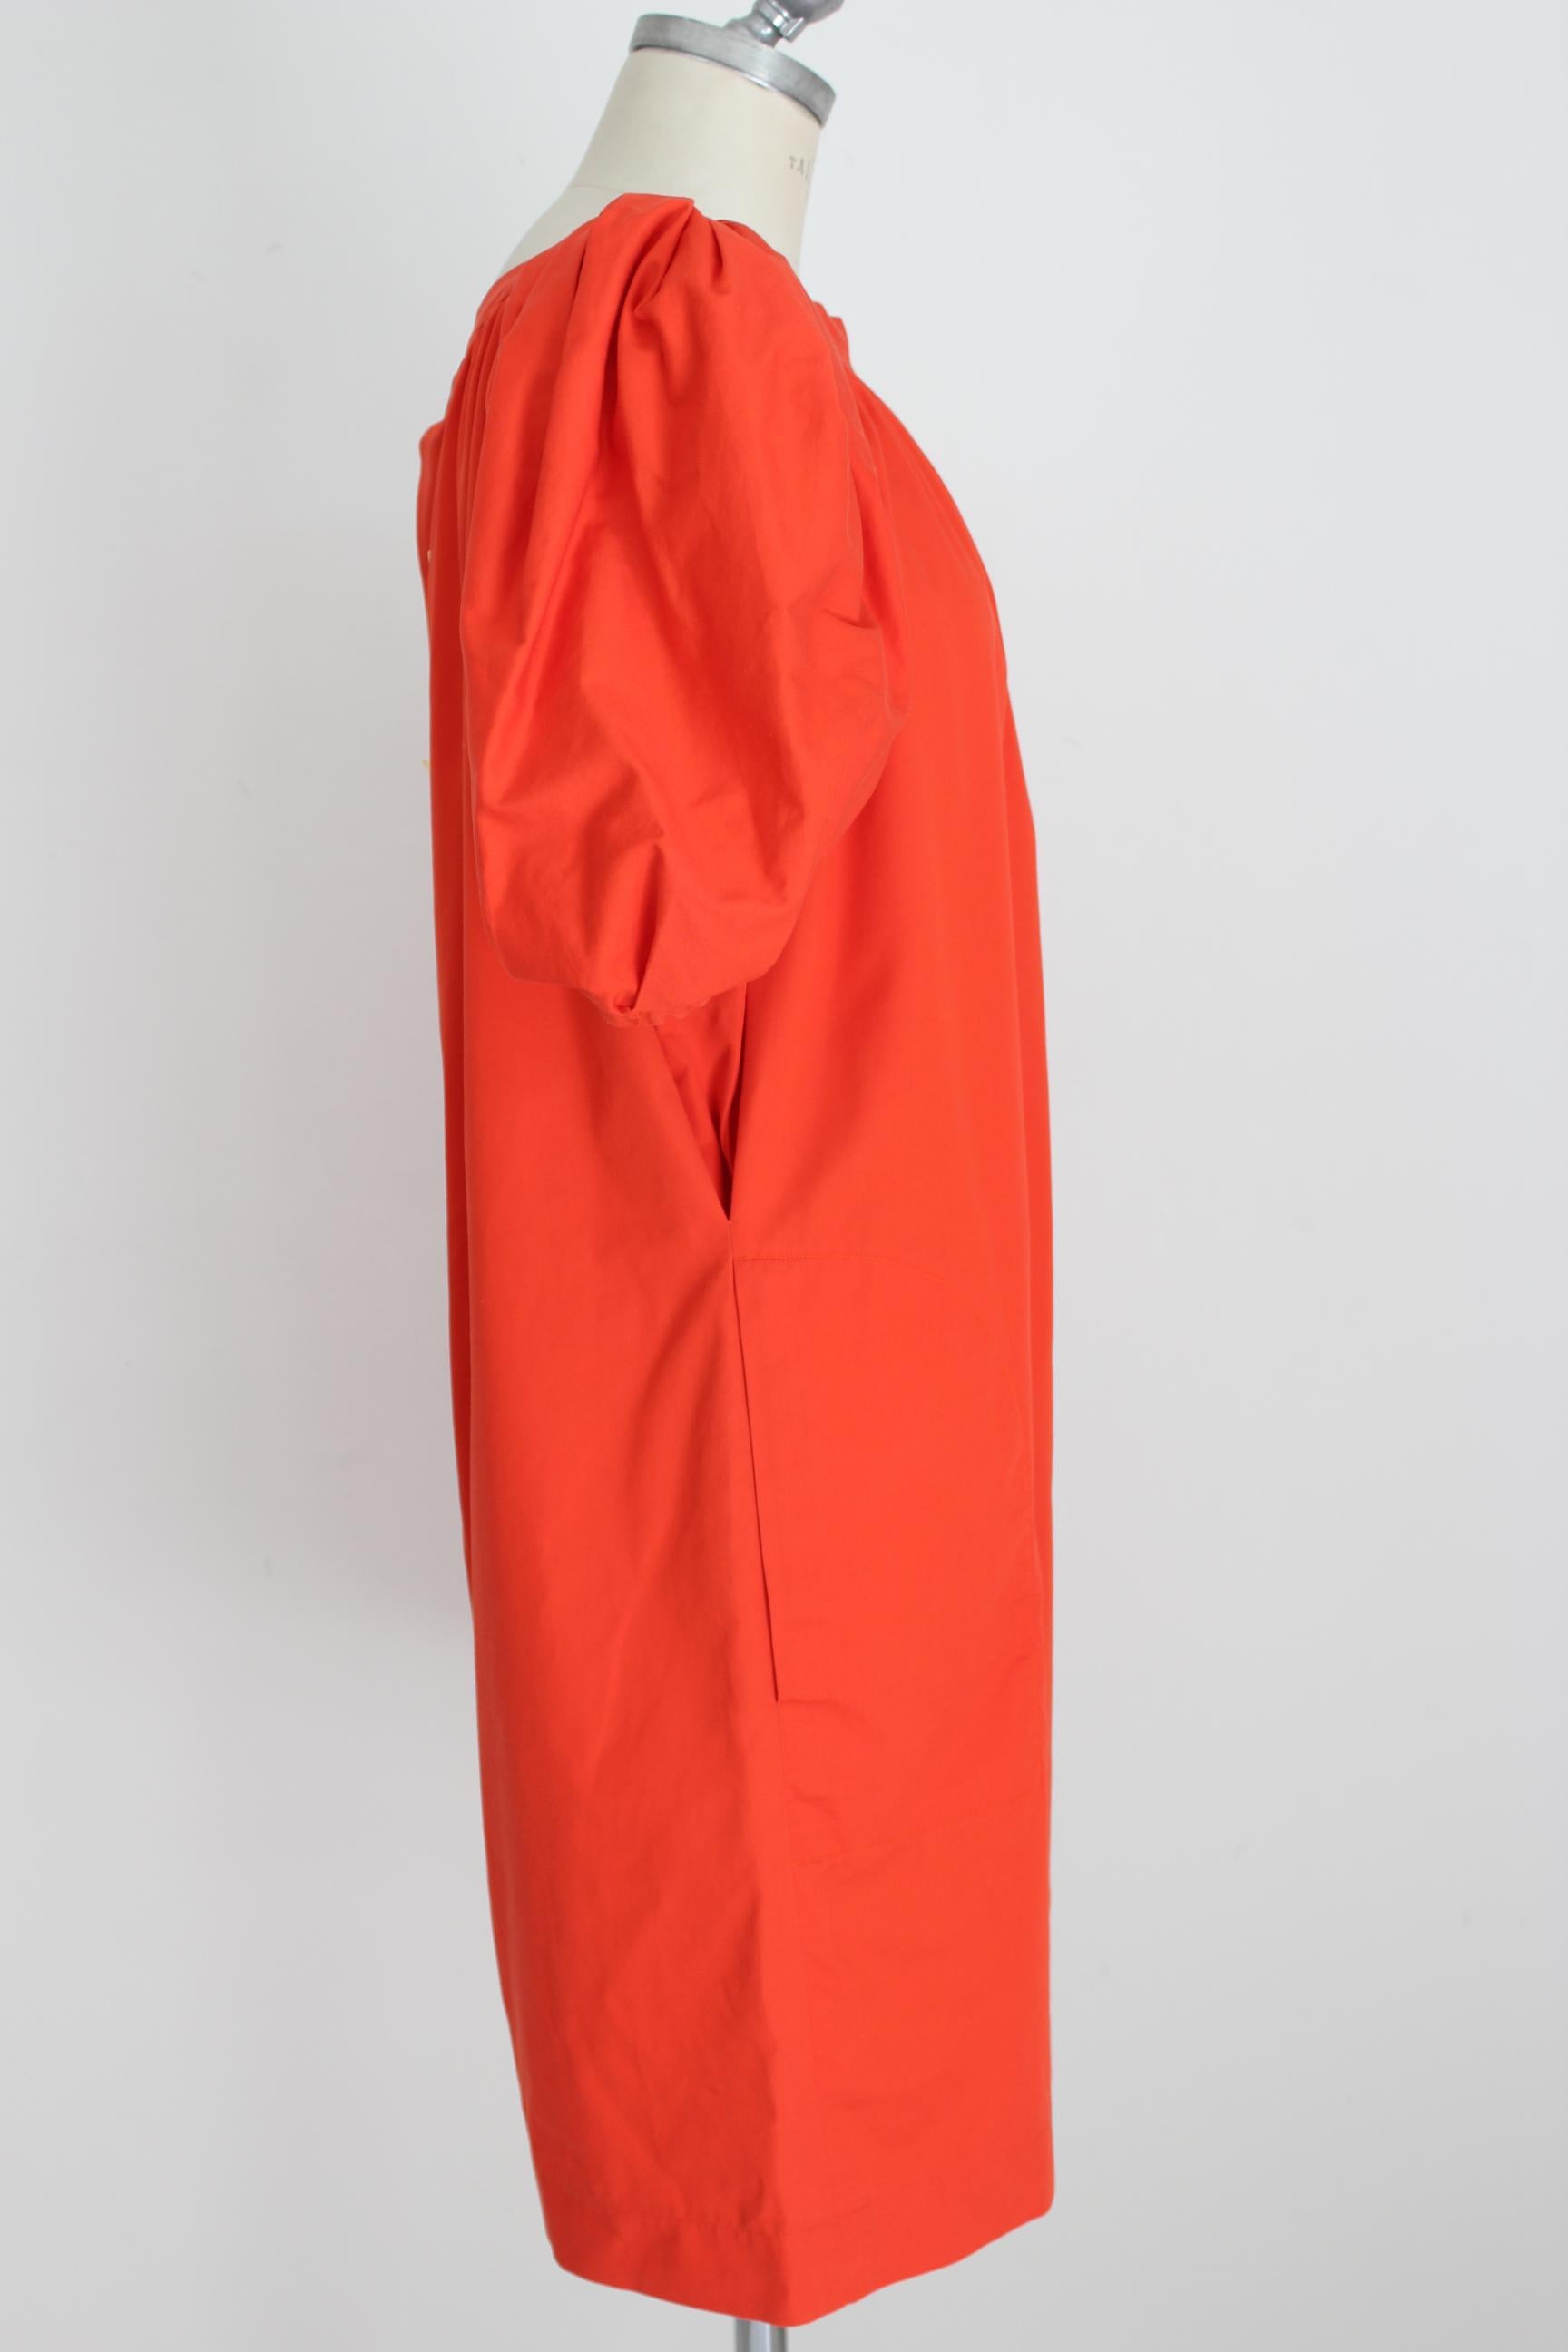 Yves Saint Laurent Rive Gauche Red Cotton Straight Cocktail Dress 1980s In Excellent Condition In Brindisi, Bt